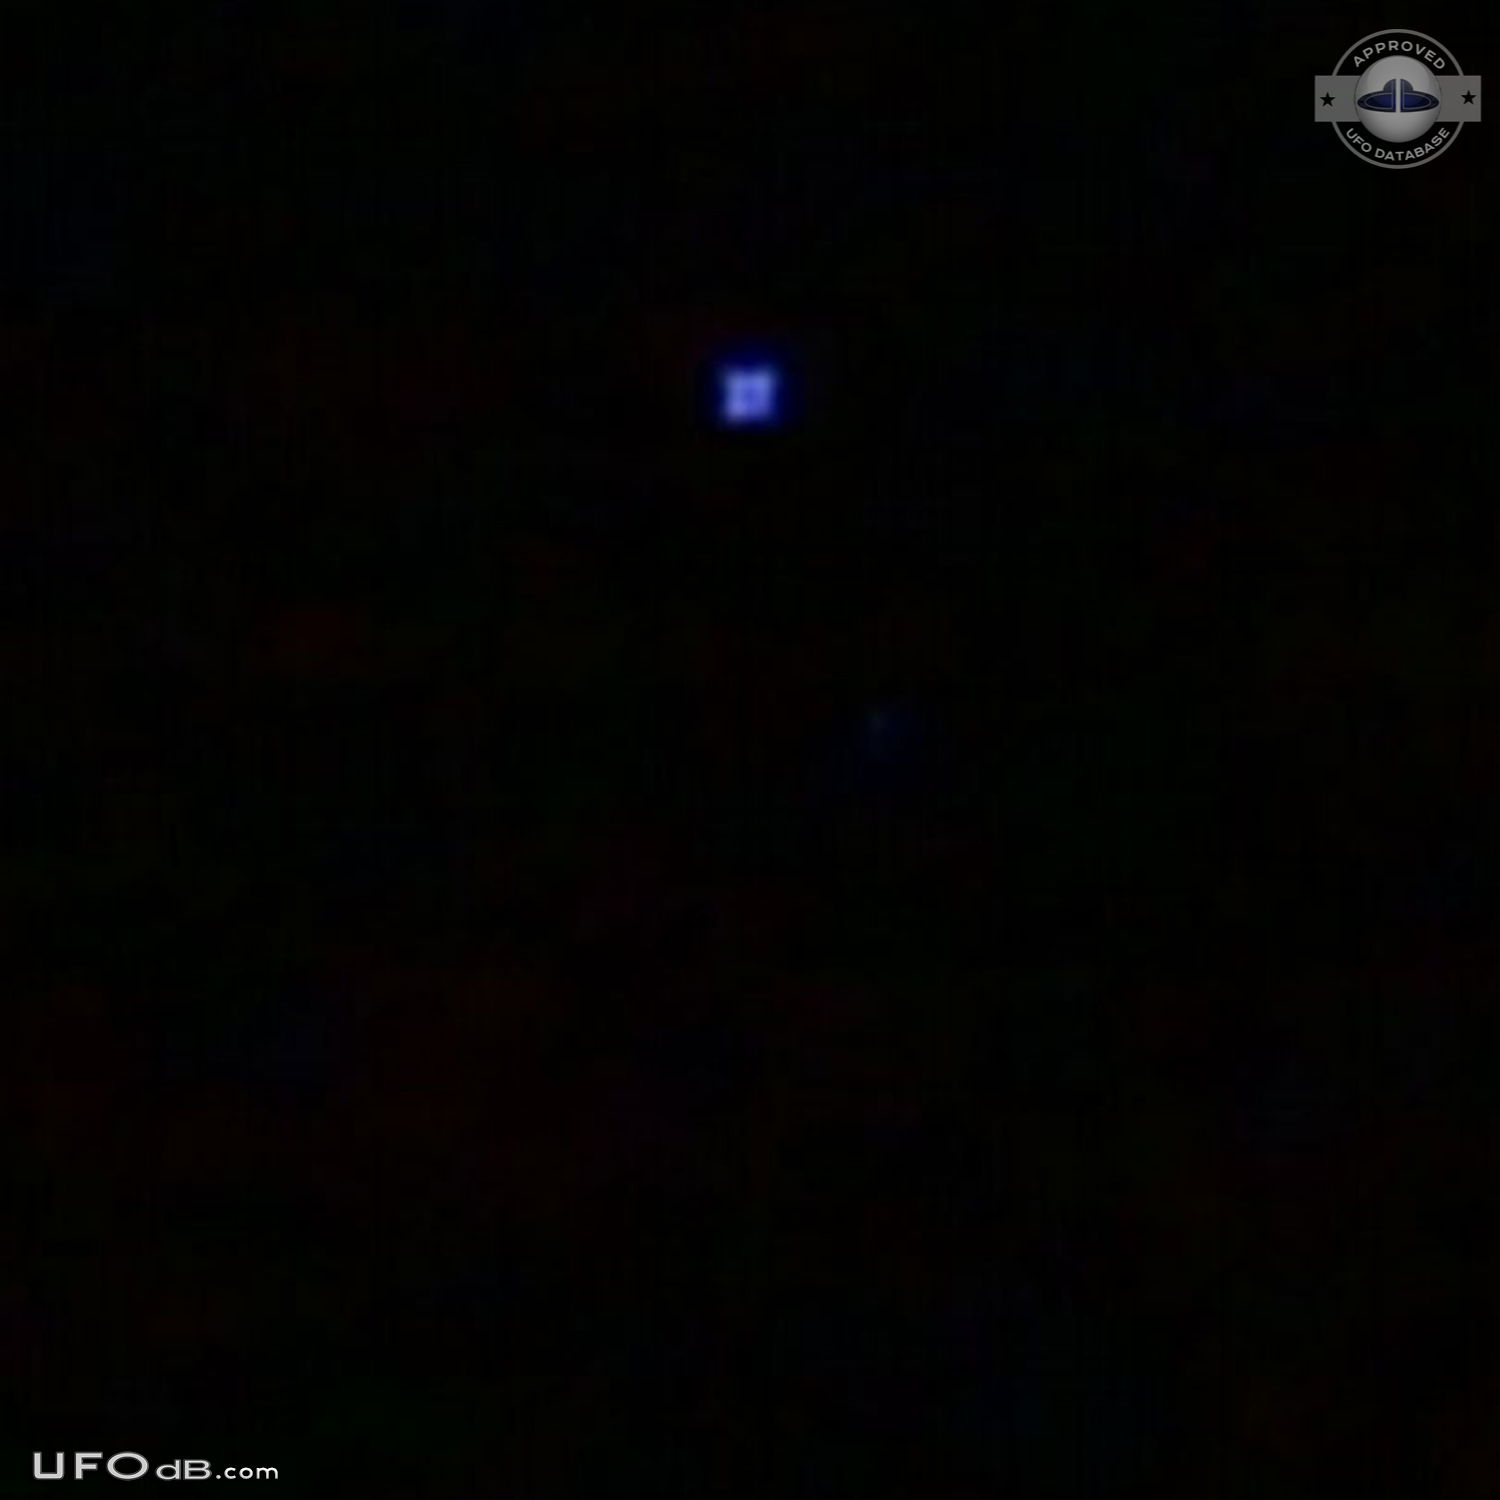 FAA AP certified person knew this was NOT a plane Houston Texas 2014 UFO Picture #650-2